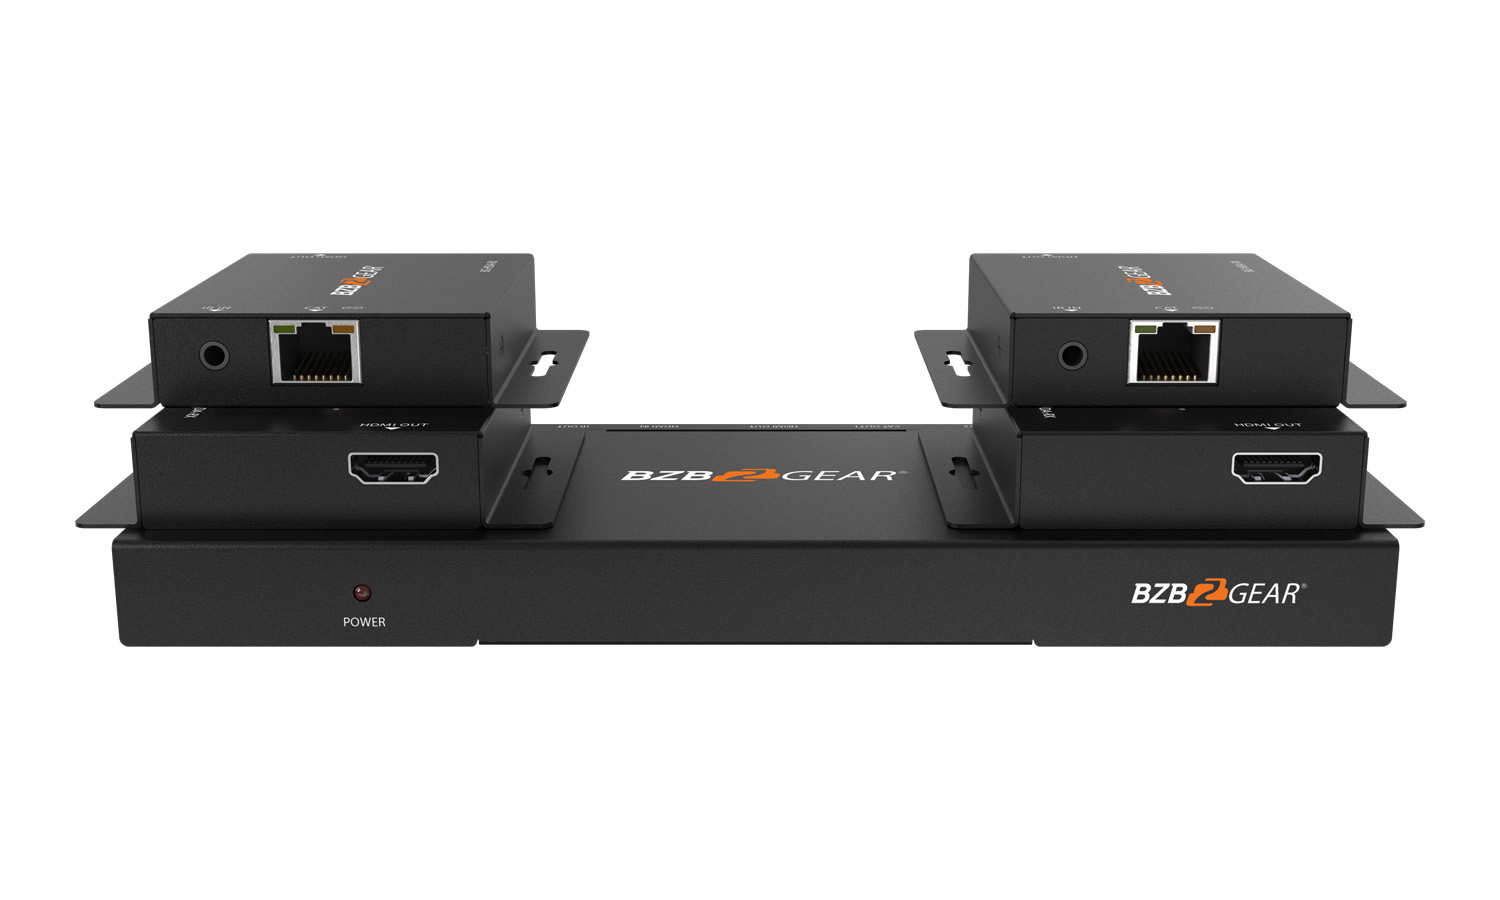 BG-HDA-E14 1X4 1080P/4K30 HDMI Splitter/Distribution Amplifier up to 230ft over Single Category 5e/6/7 Cable by BZBGEAR